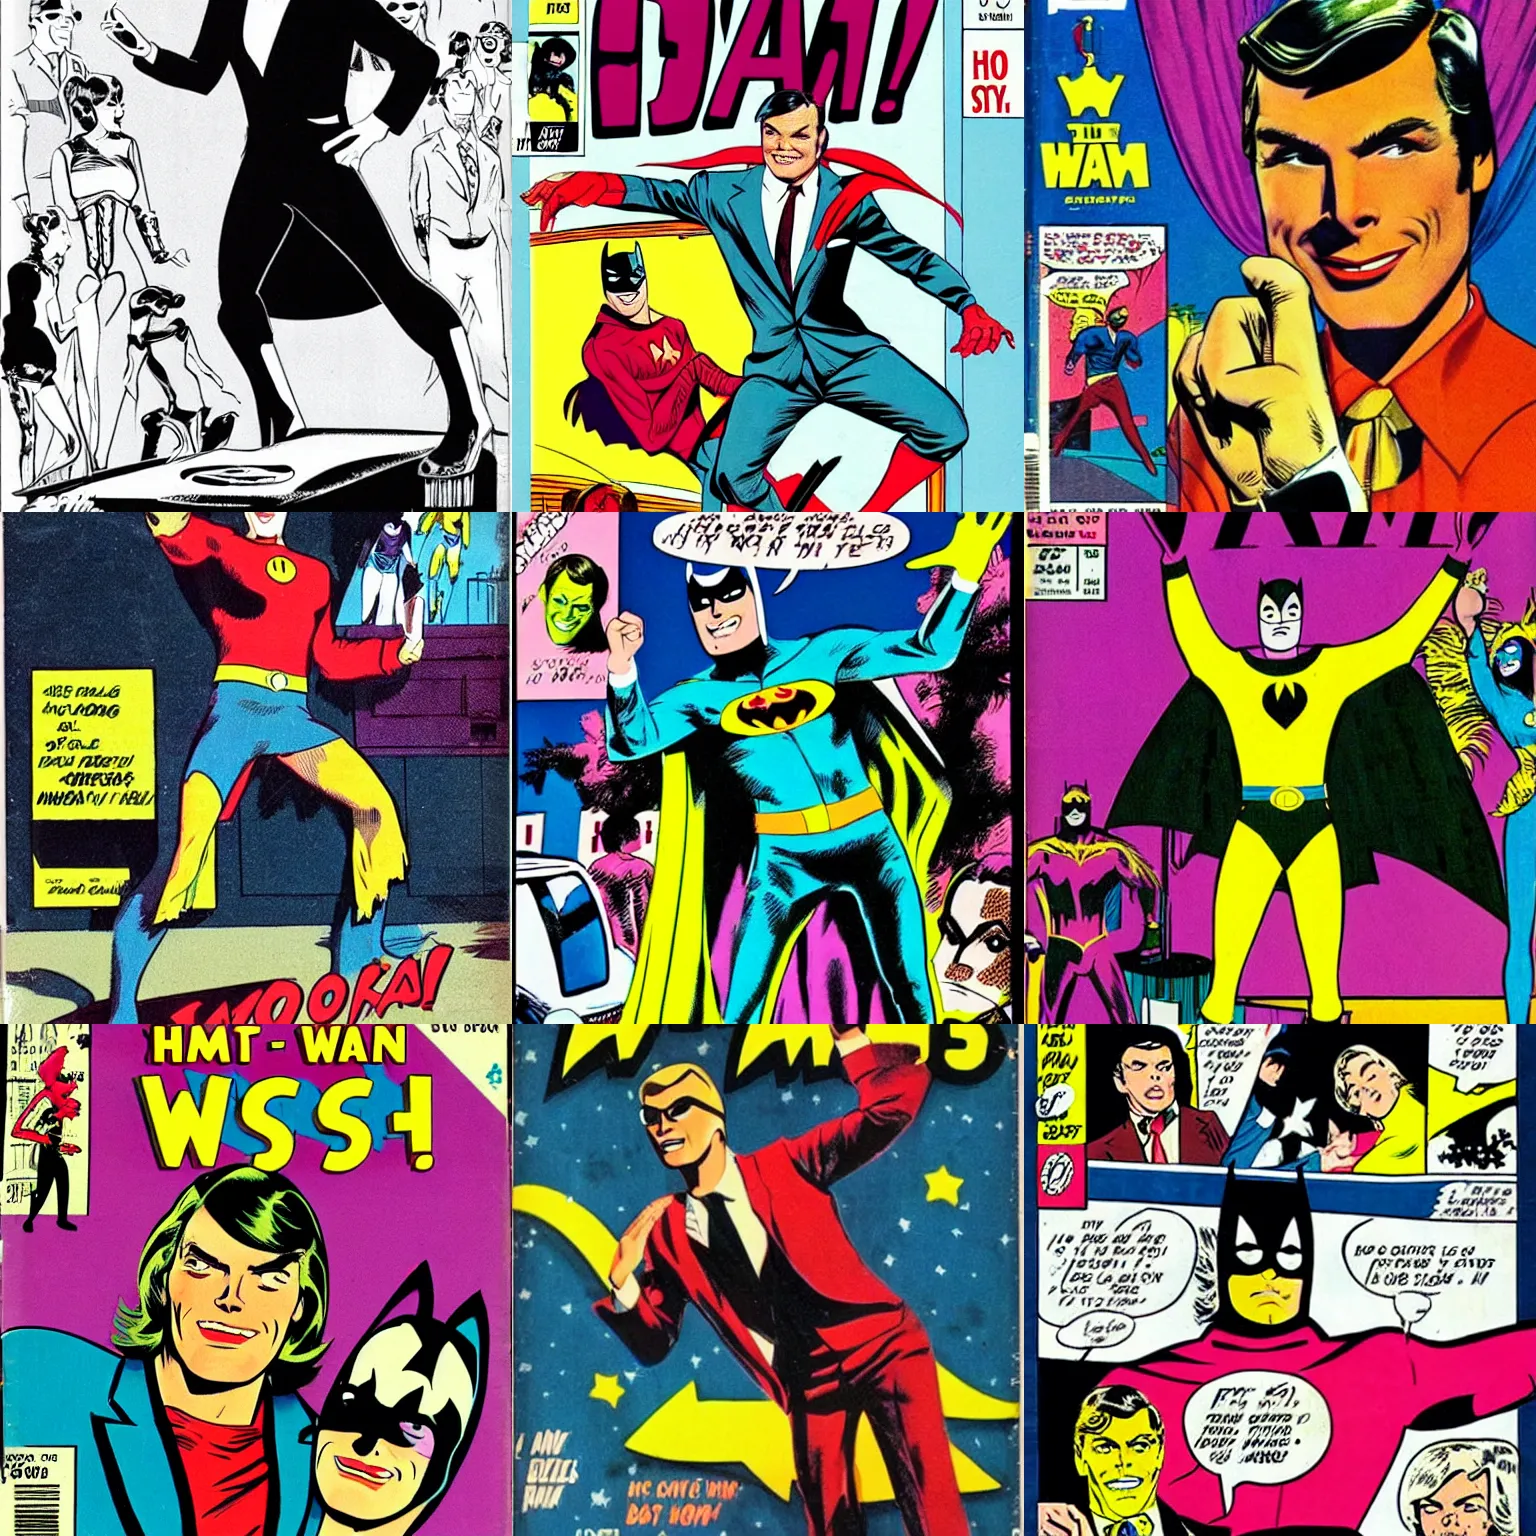 Prompt: Adam West dancing in the style of the 1960s, comic book, hippy